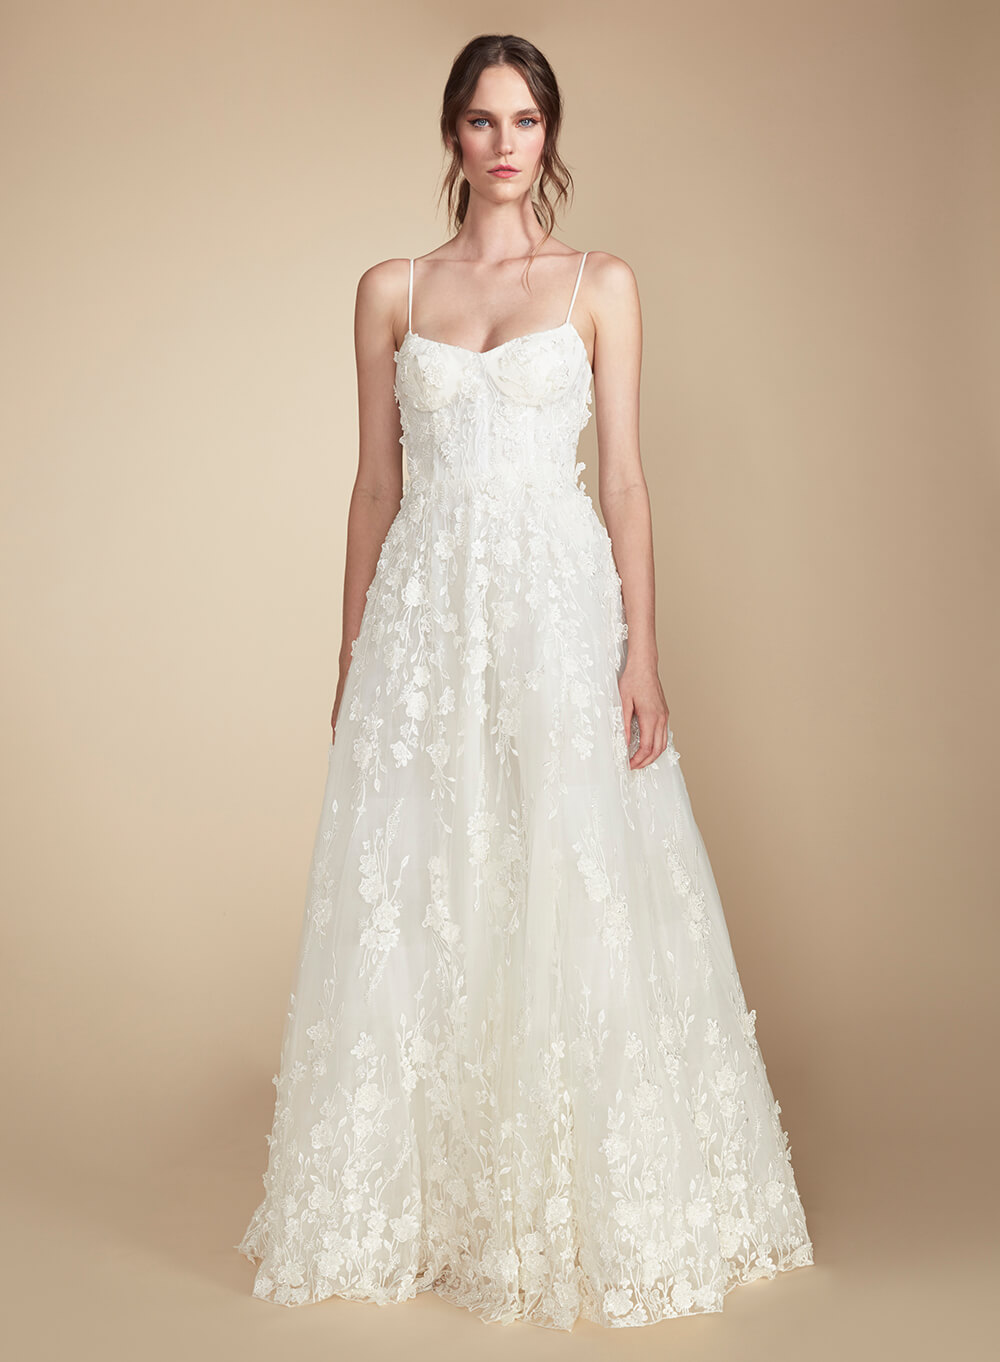 straight simple gown